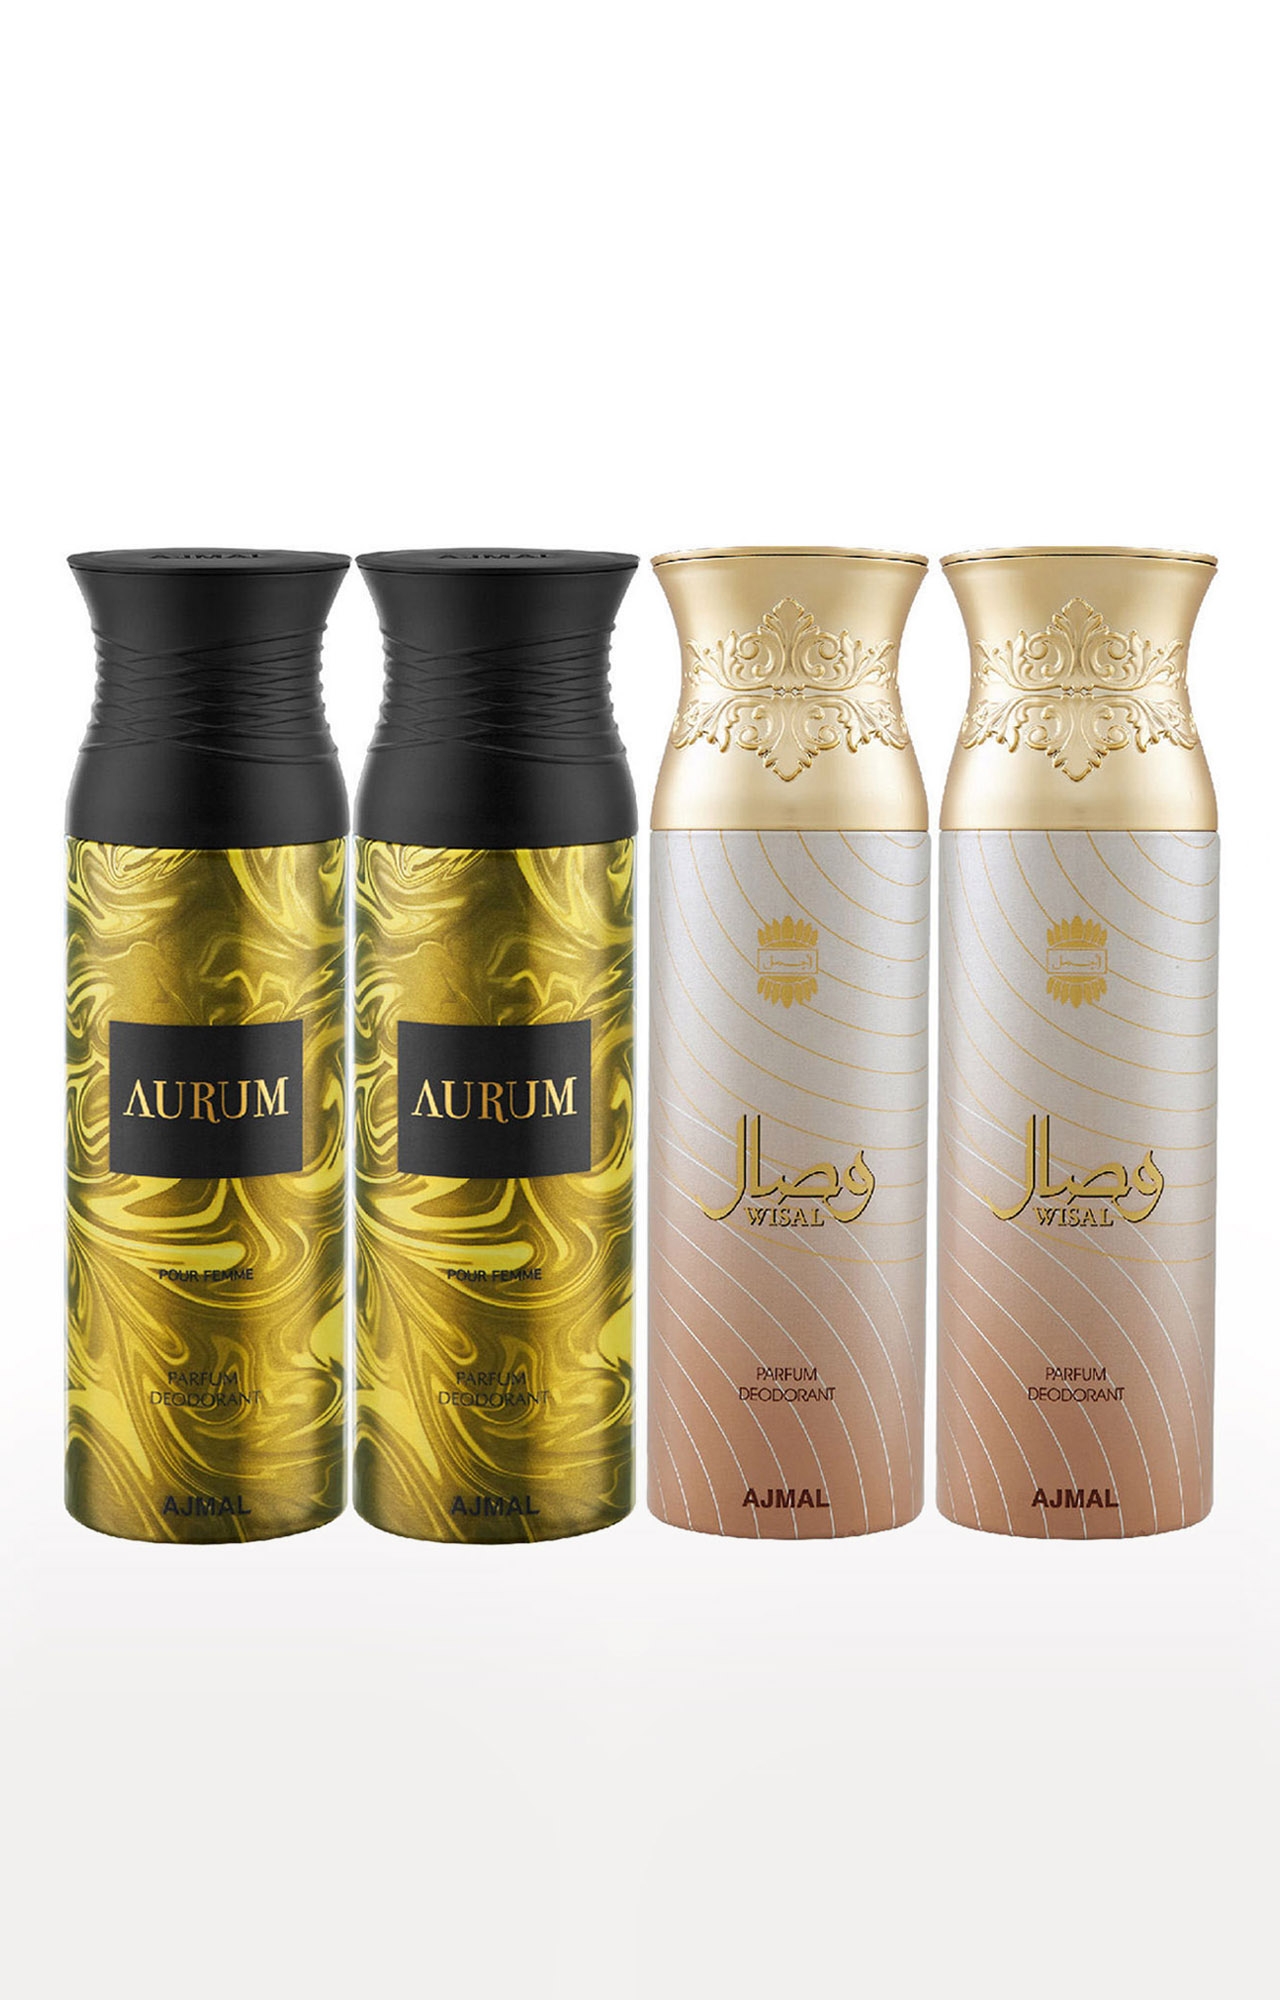 Ajmal | Ajmal Tempest Concentrated Perfume Oil Floral Alcohol- Attar 12Ml For Unisex And Maryaj M For Her Eau De Parfum Fruity Floral Perfume 90Ml For Women